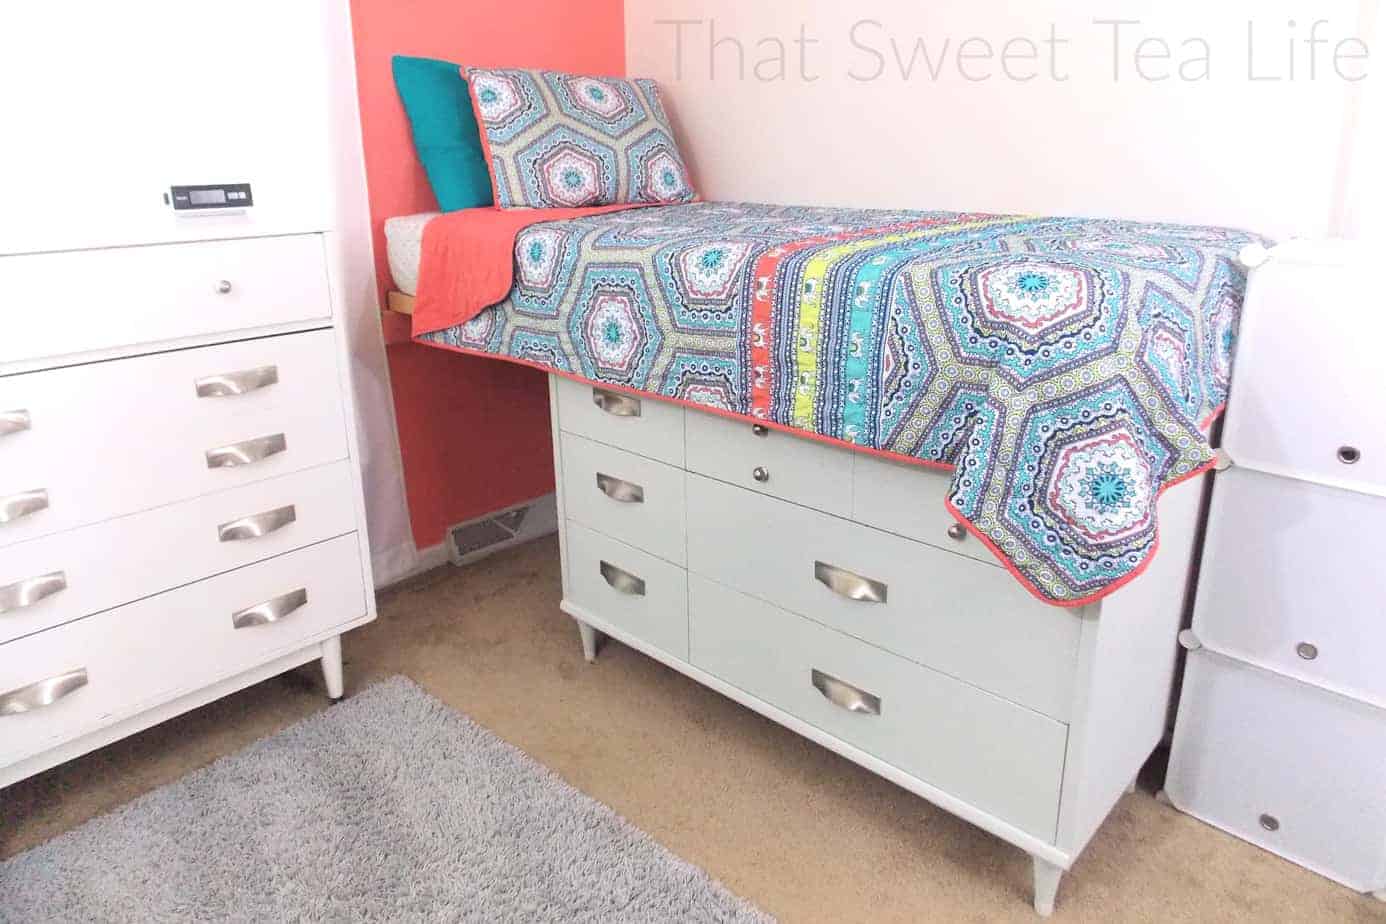 How To Make Beds With Storage, How To Make A Twin Bed With Storage Underneath